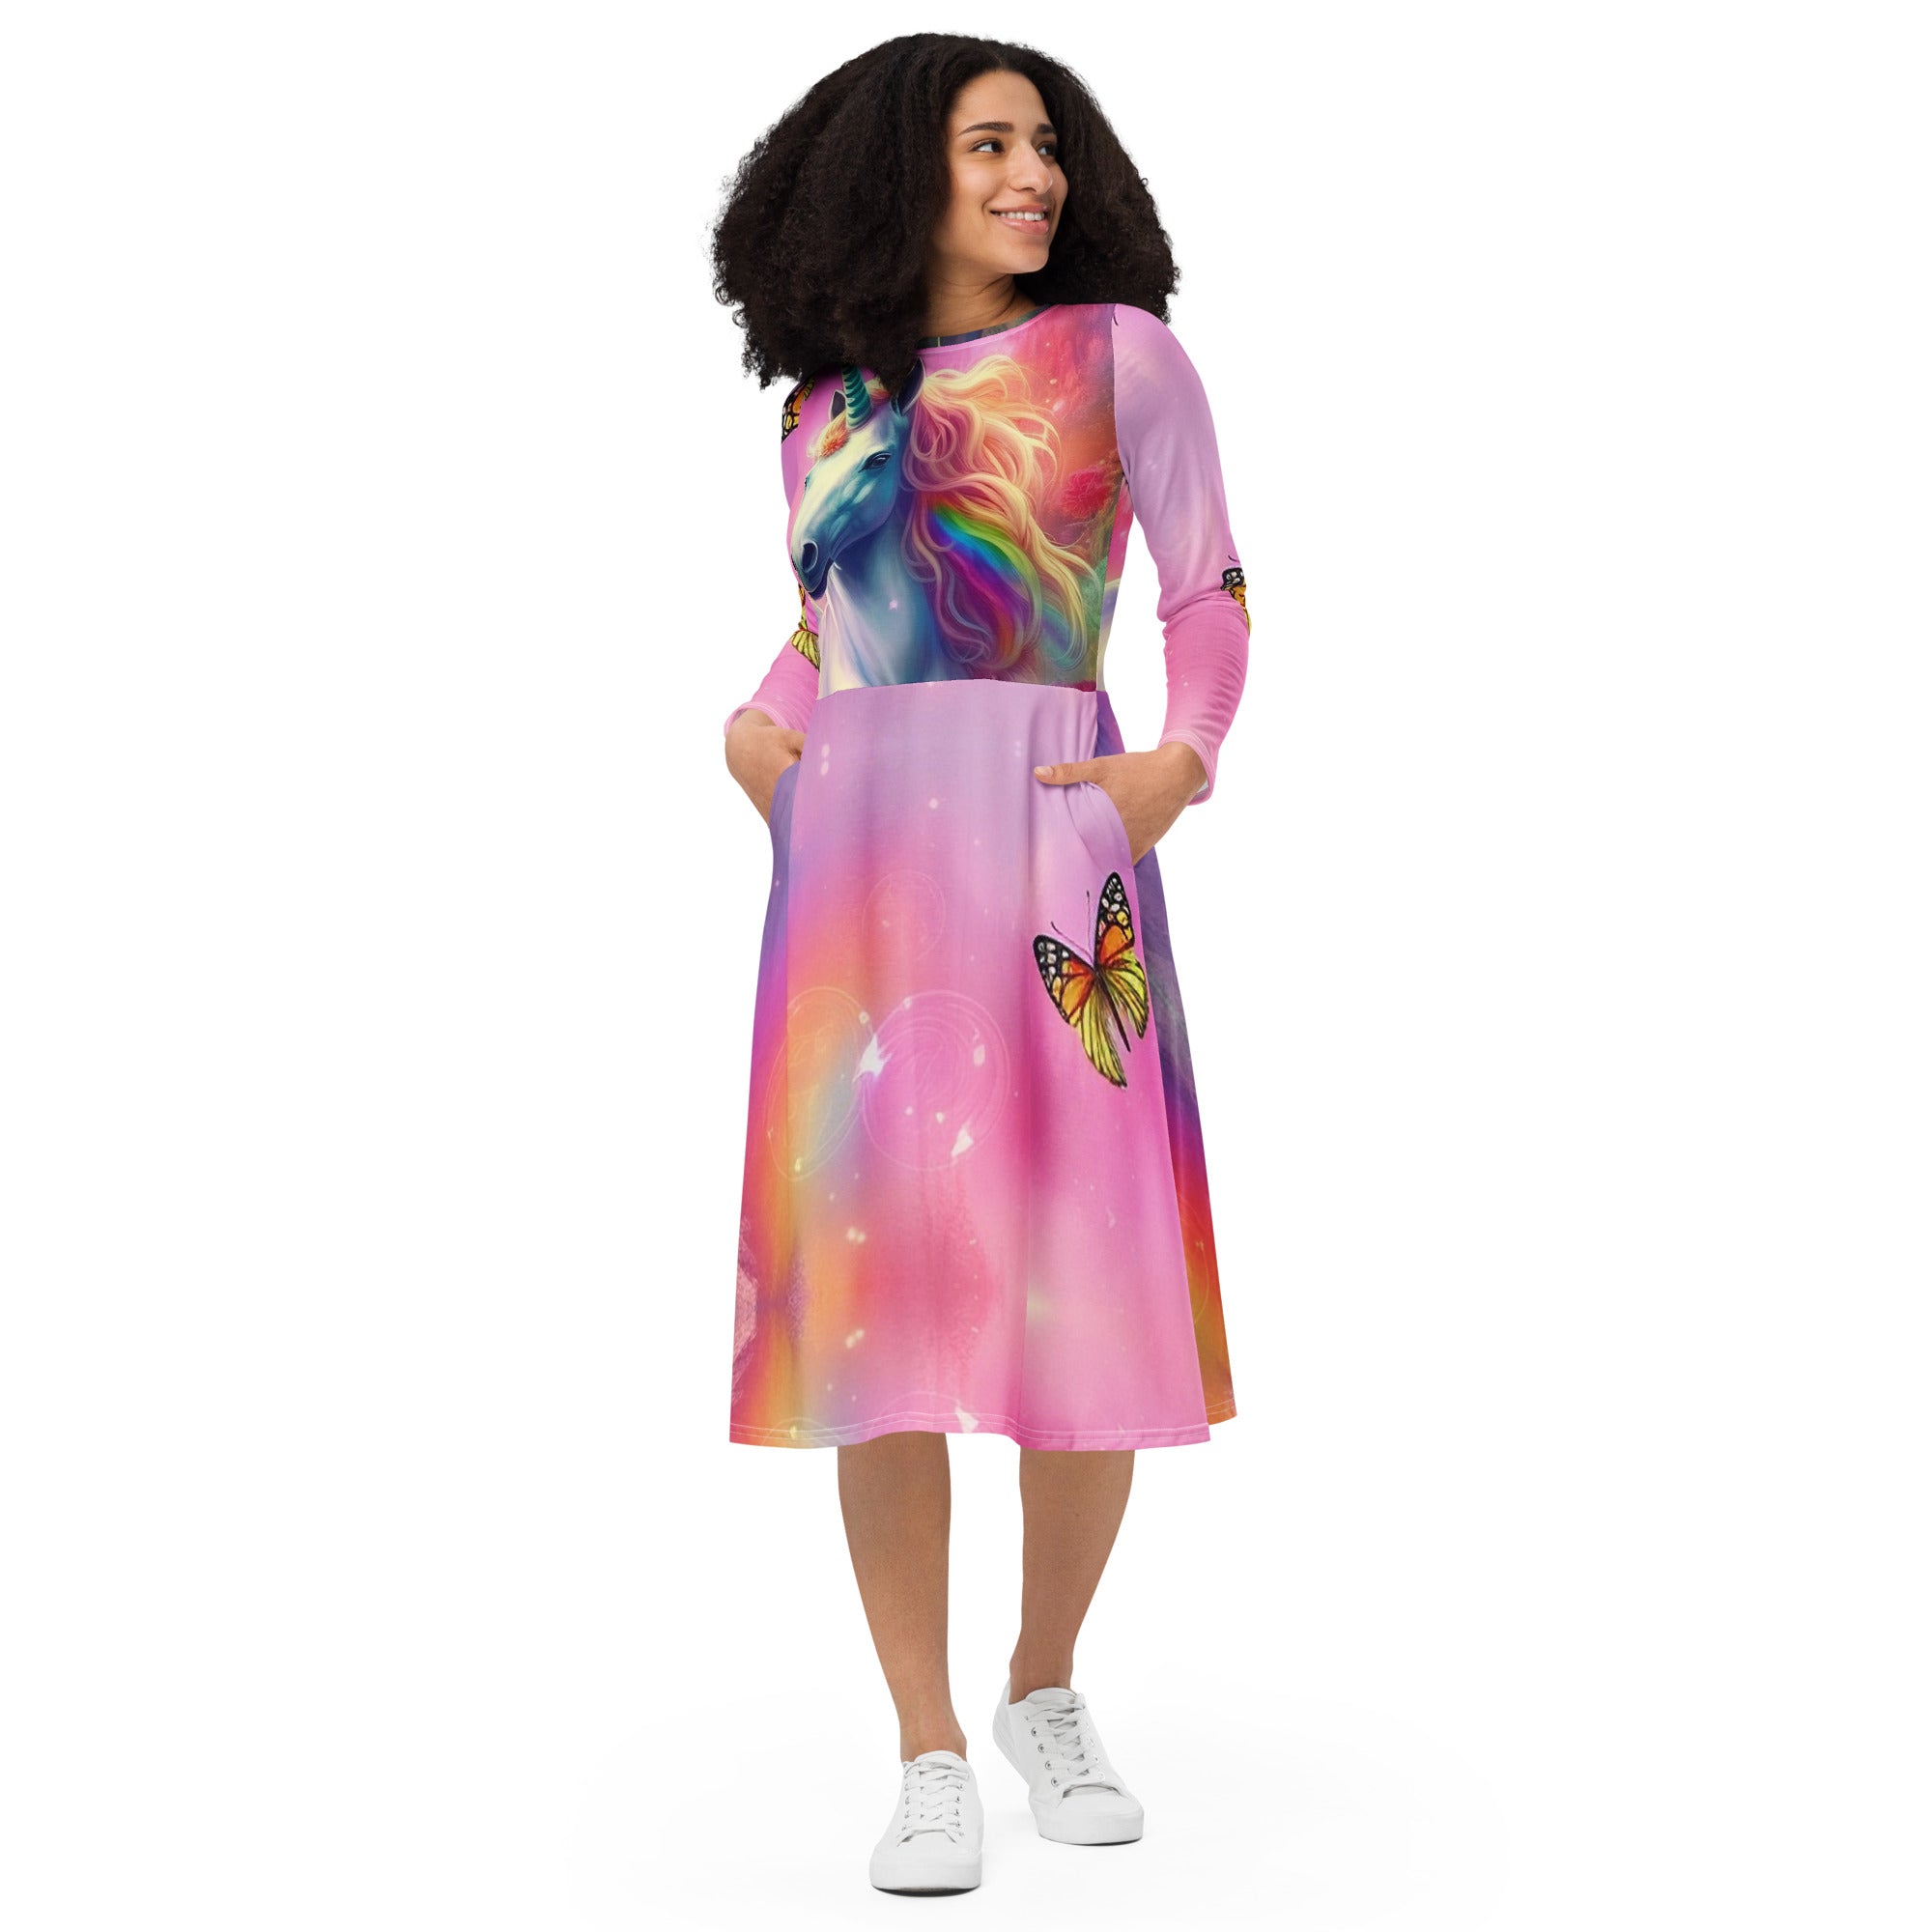 Captivate Hearts and Turn Heads: Radiate Elegance in our Unicorn and Butterflies Dress | Woman Unicorn Dress | Girls Unicorn Pink Dress